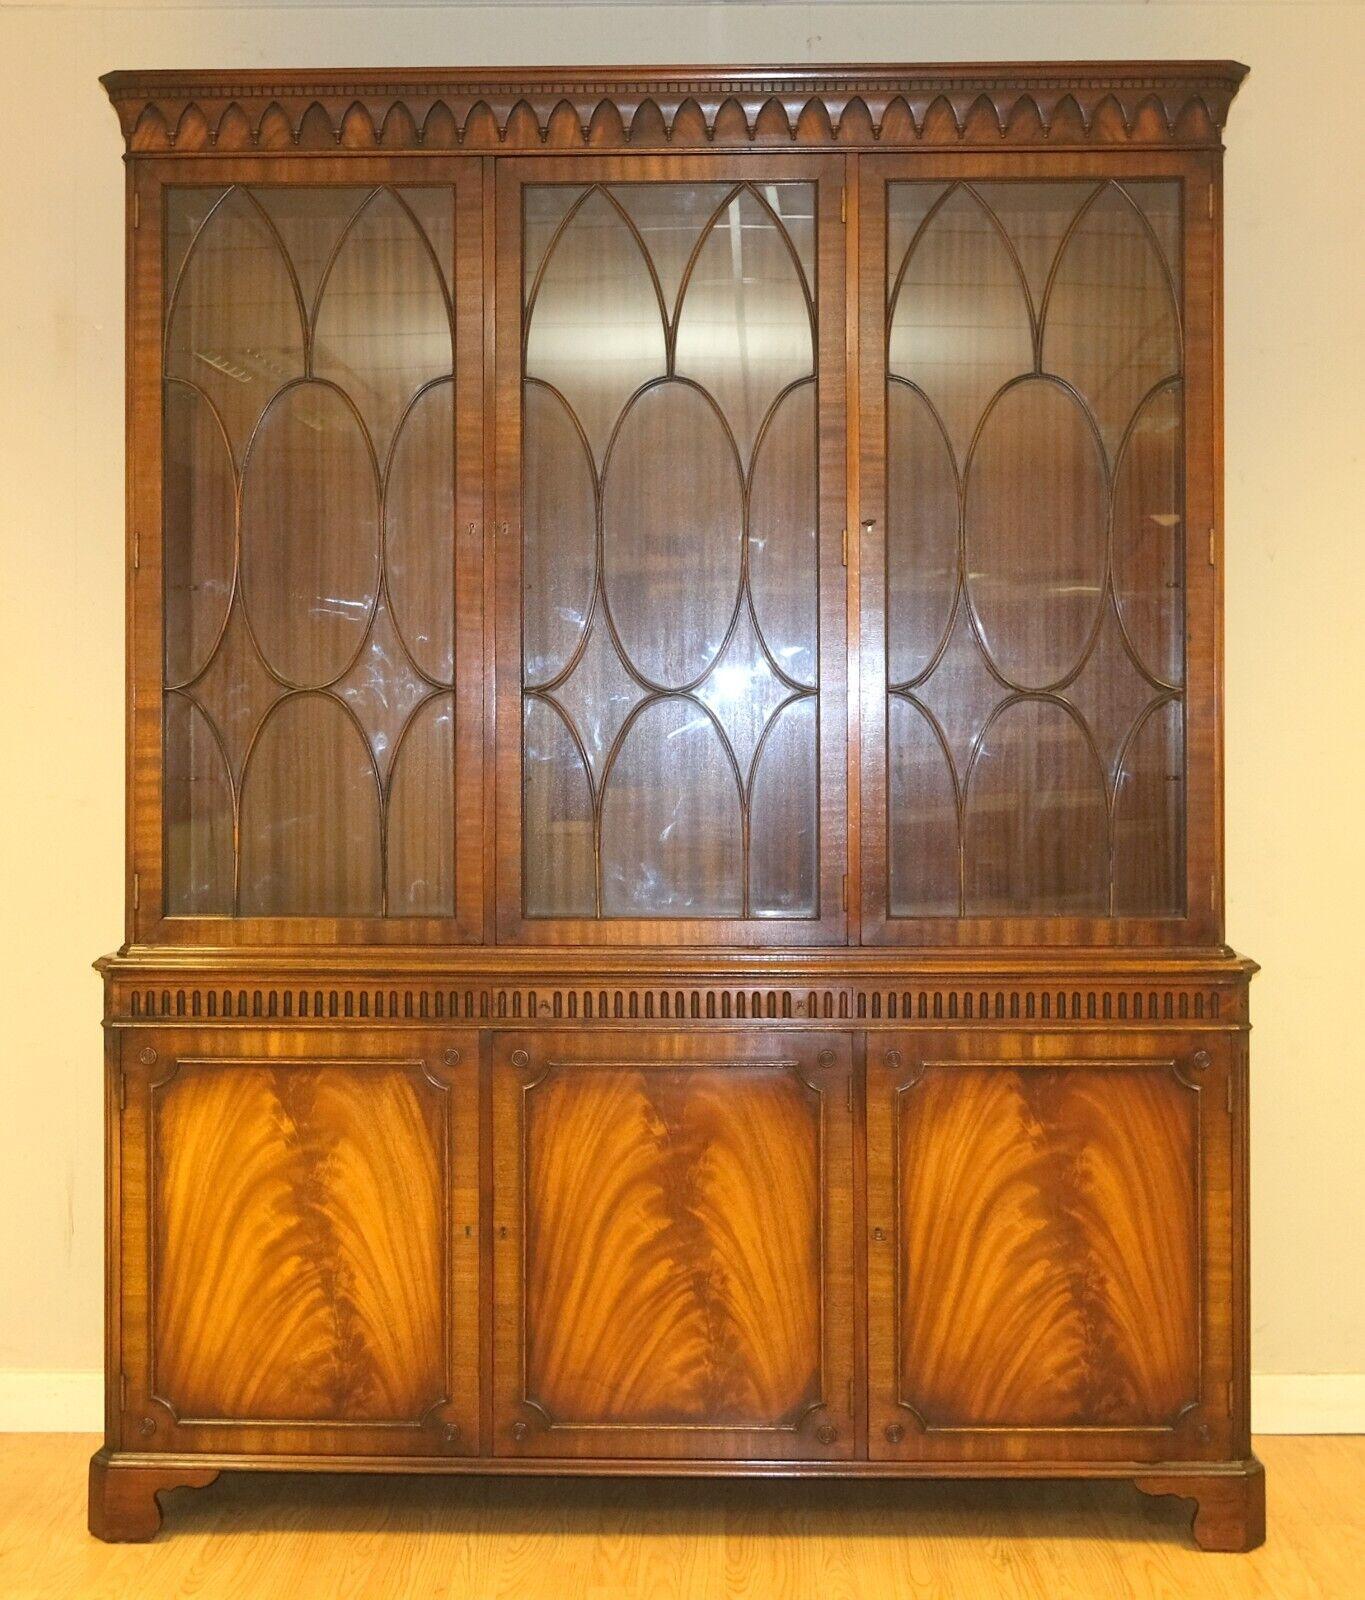 We are delighted to offer for sale this stunning Bevan Funnell Reprodux brown mahogany bookcase, cupboard, cabinet with glazed door.

A well made, sturdy and rich Mahogany colour cabinet from the well known British furniture maker, Bevan Funnell.